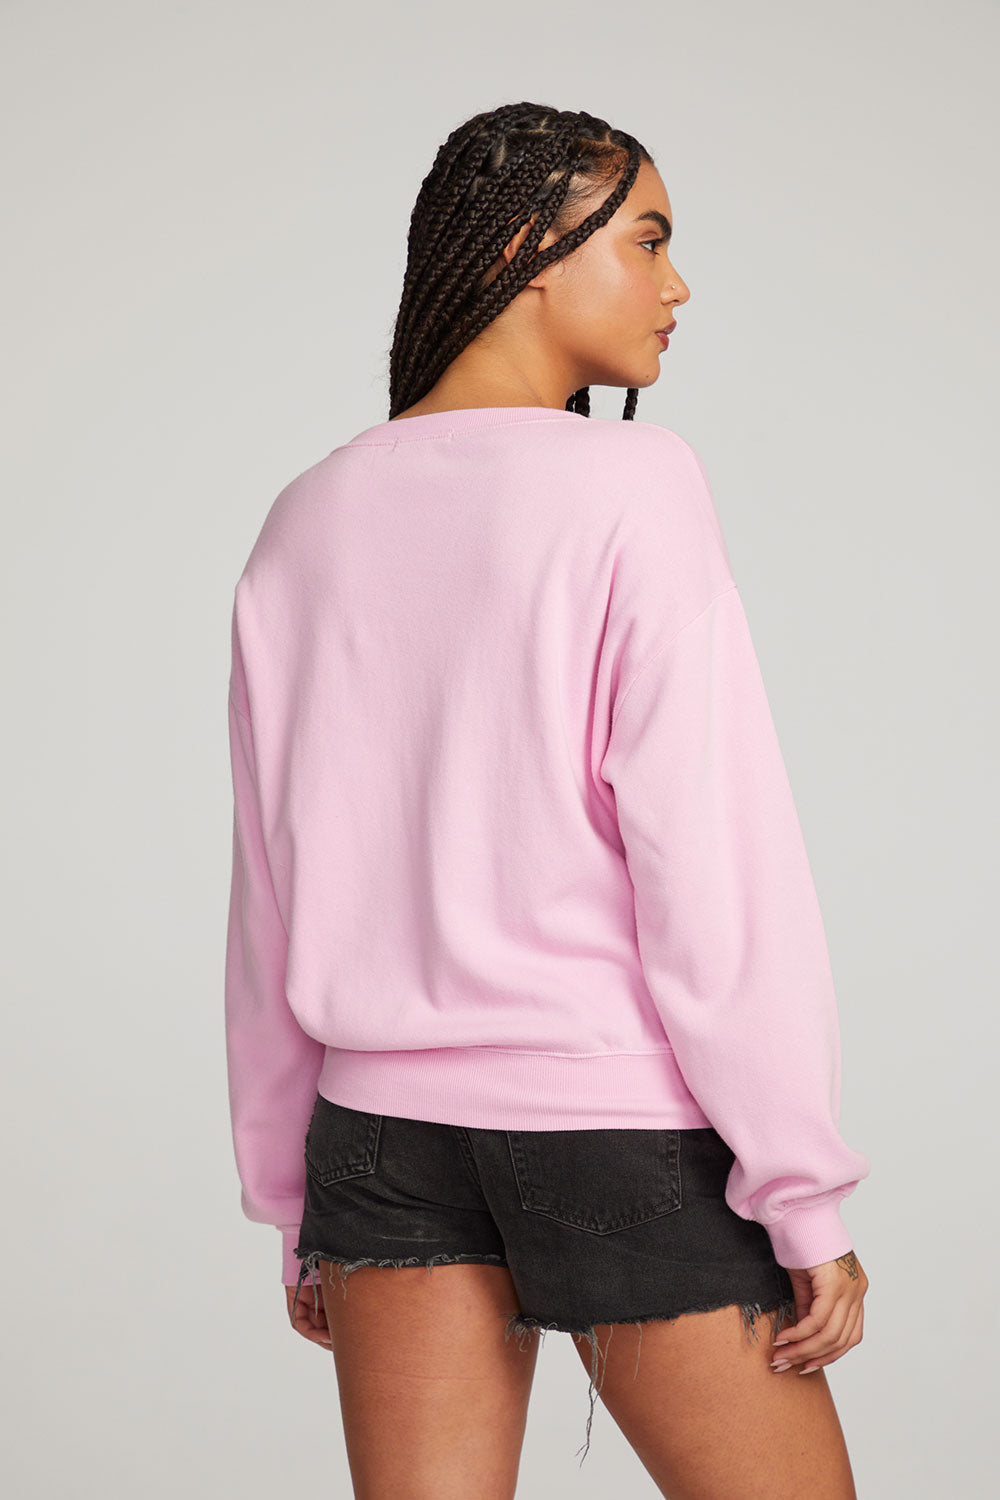 Poppy Pullover WOMENS chaserbrand